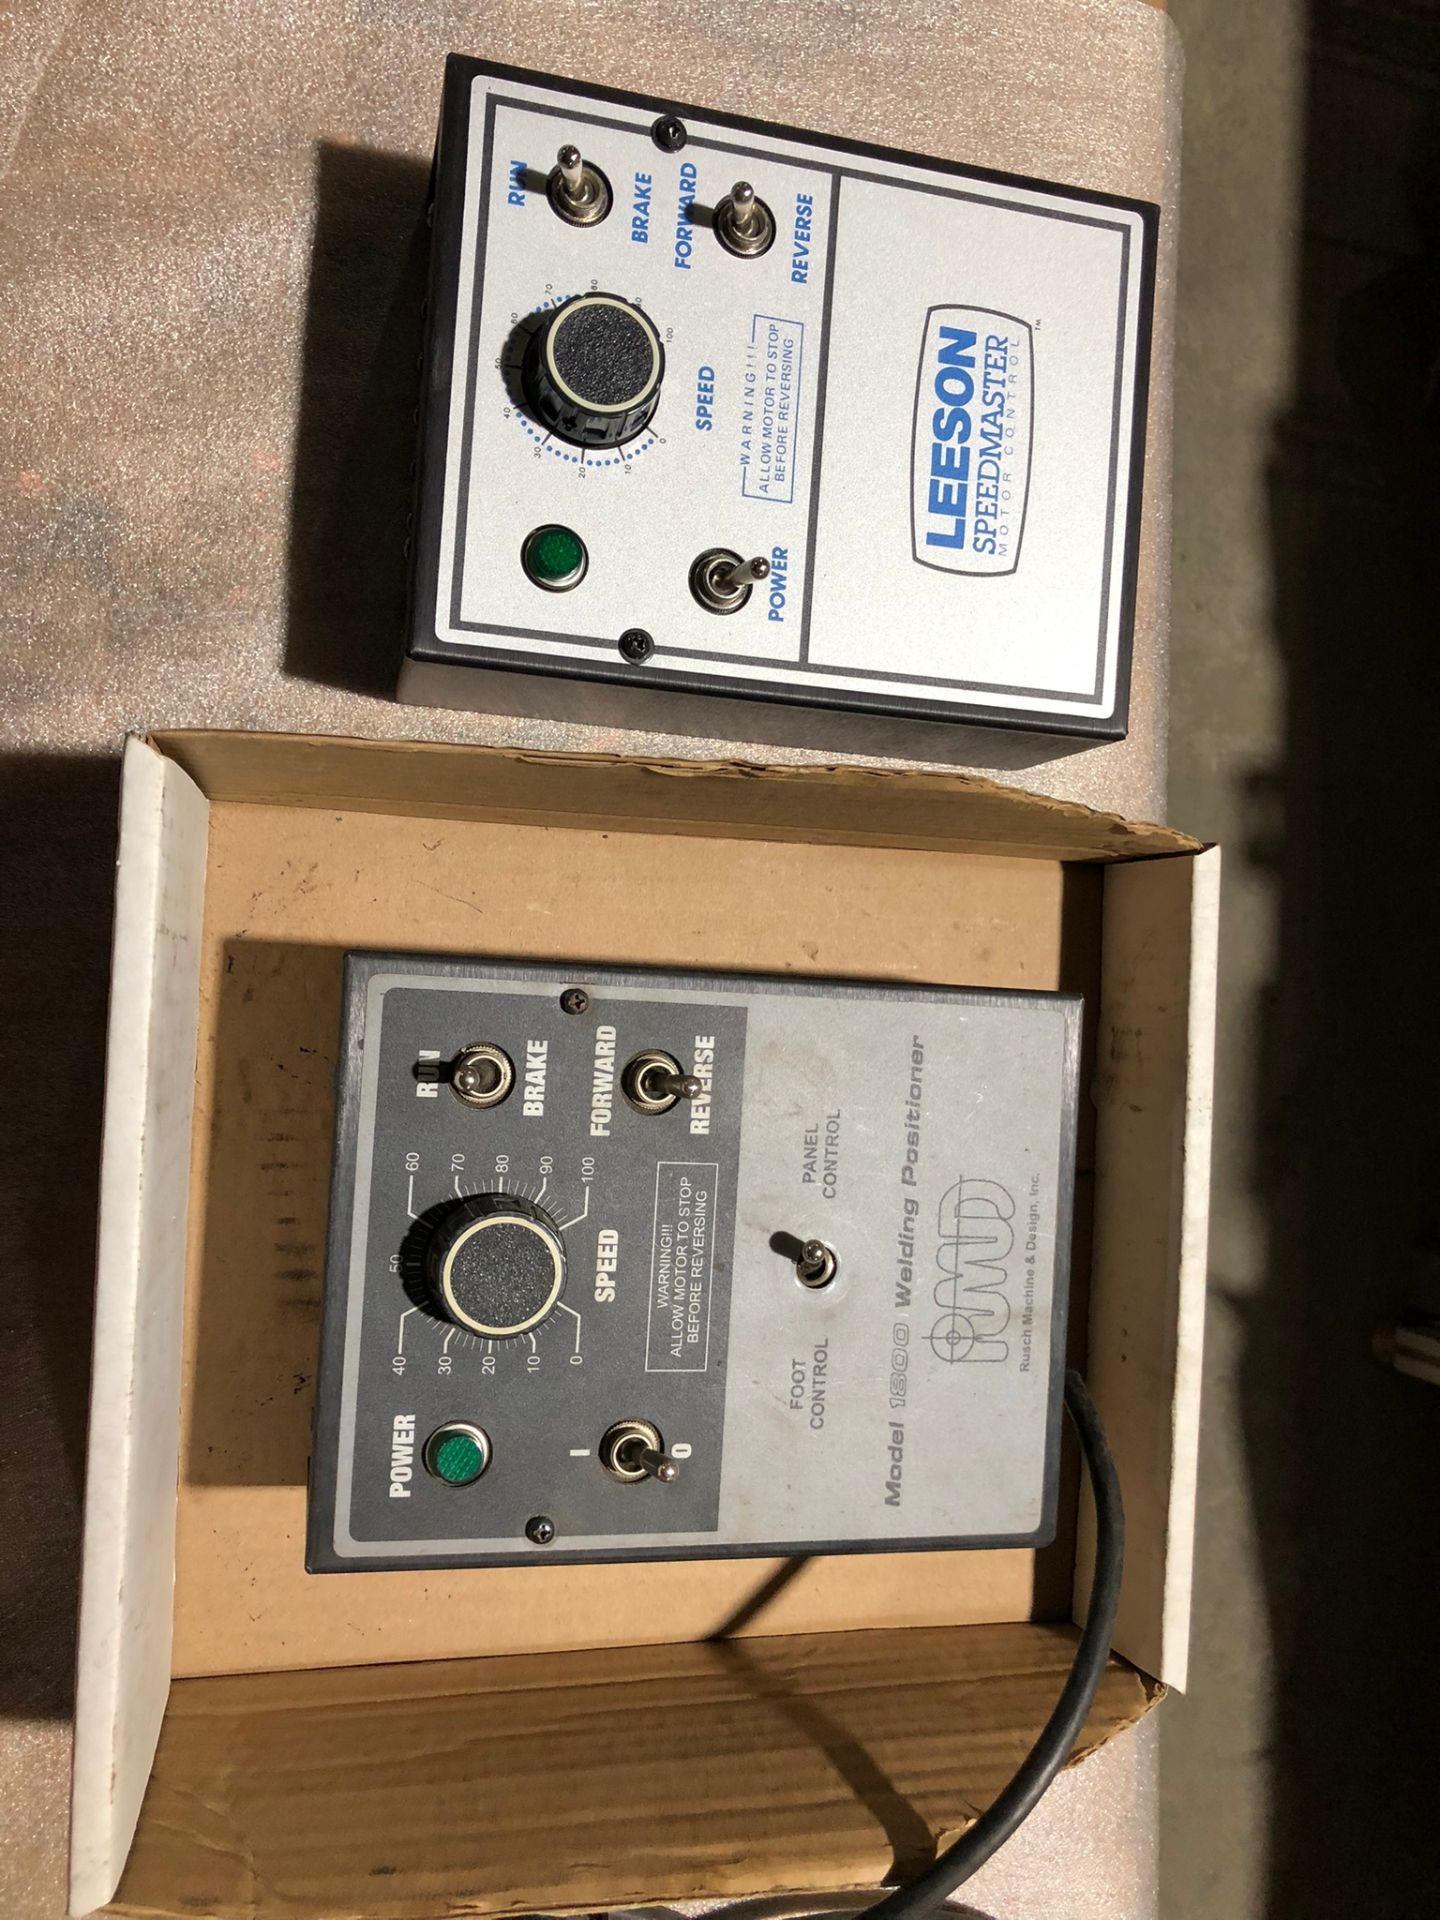 Lot of 2 (2 Units) Variable Speed Controllers with 1 foot pedal RMB and Leeson - Image 3 of 3